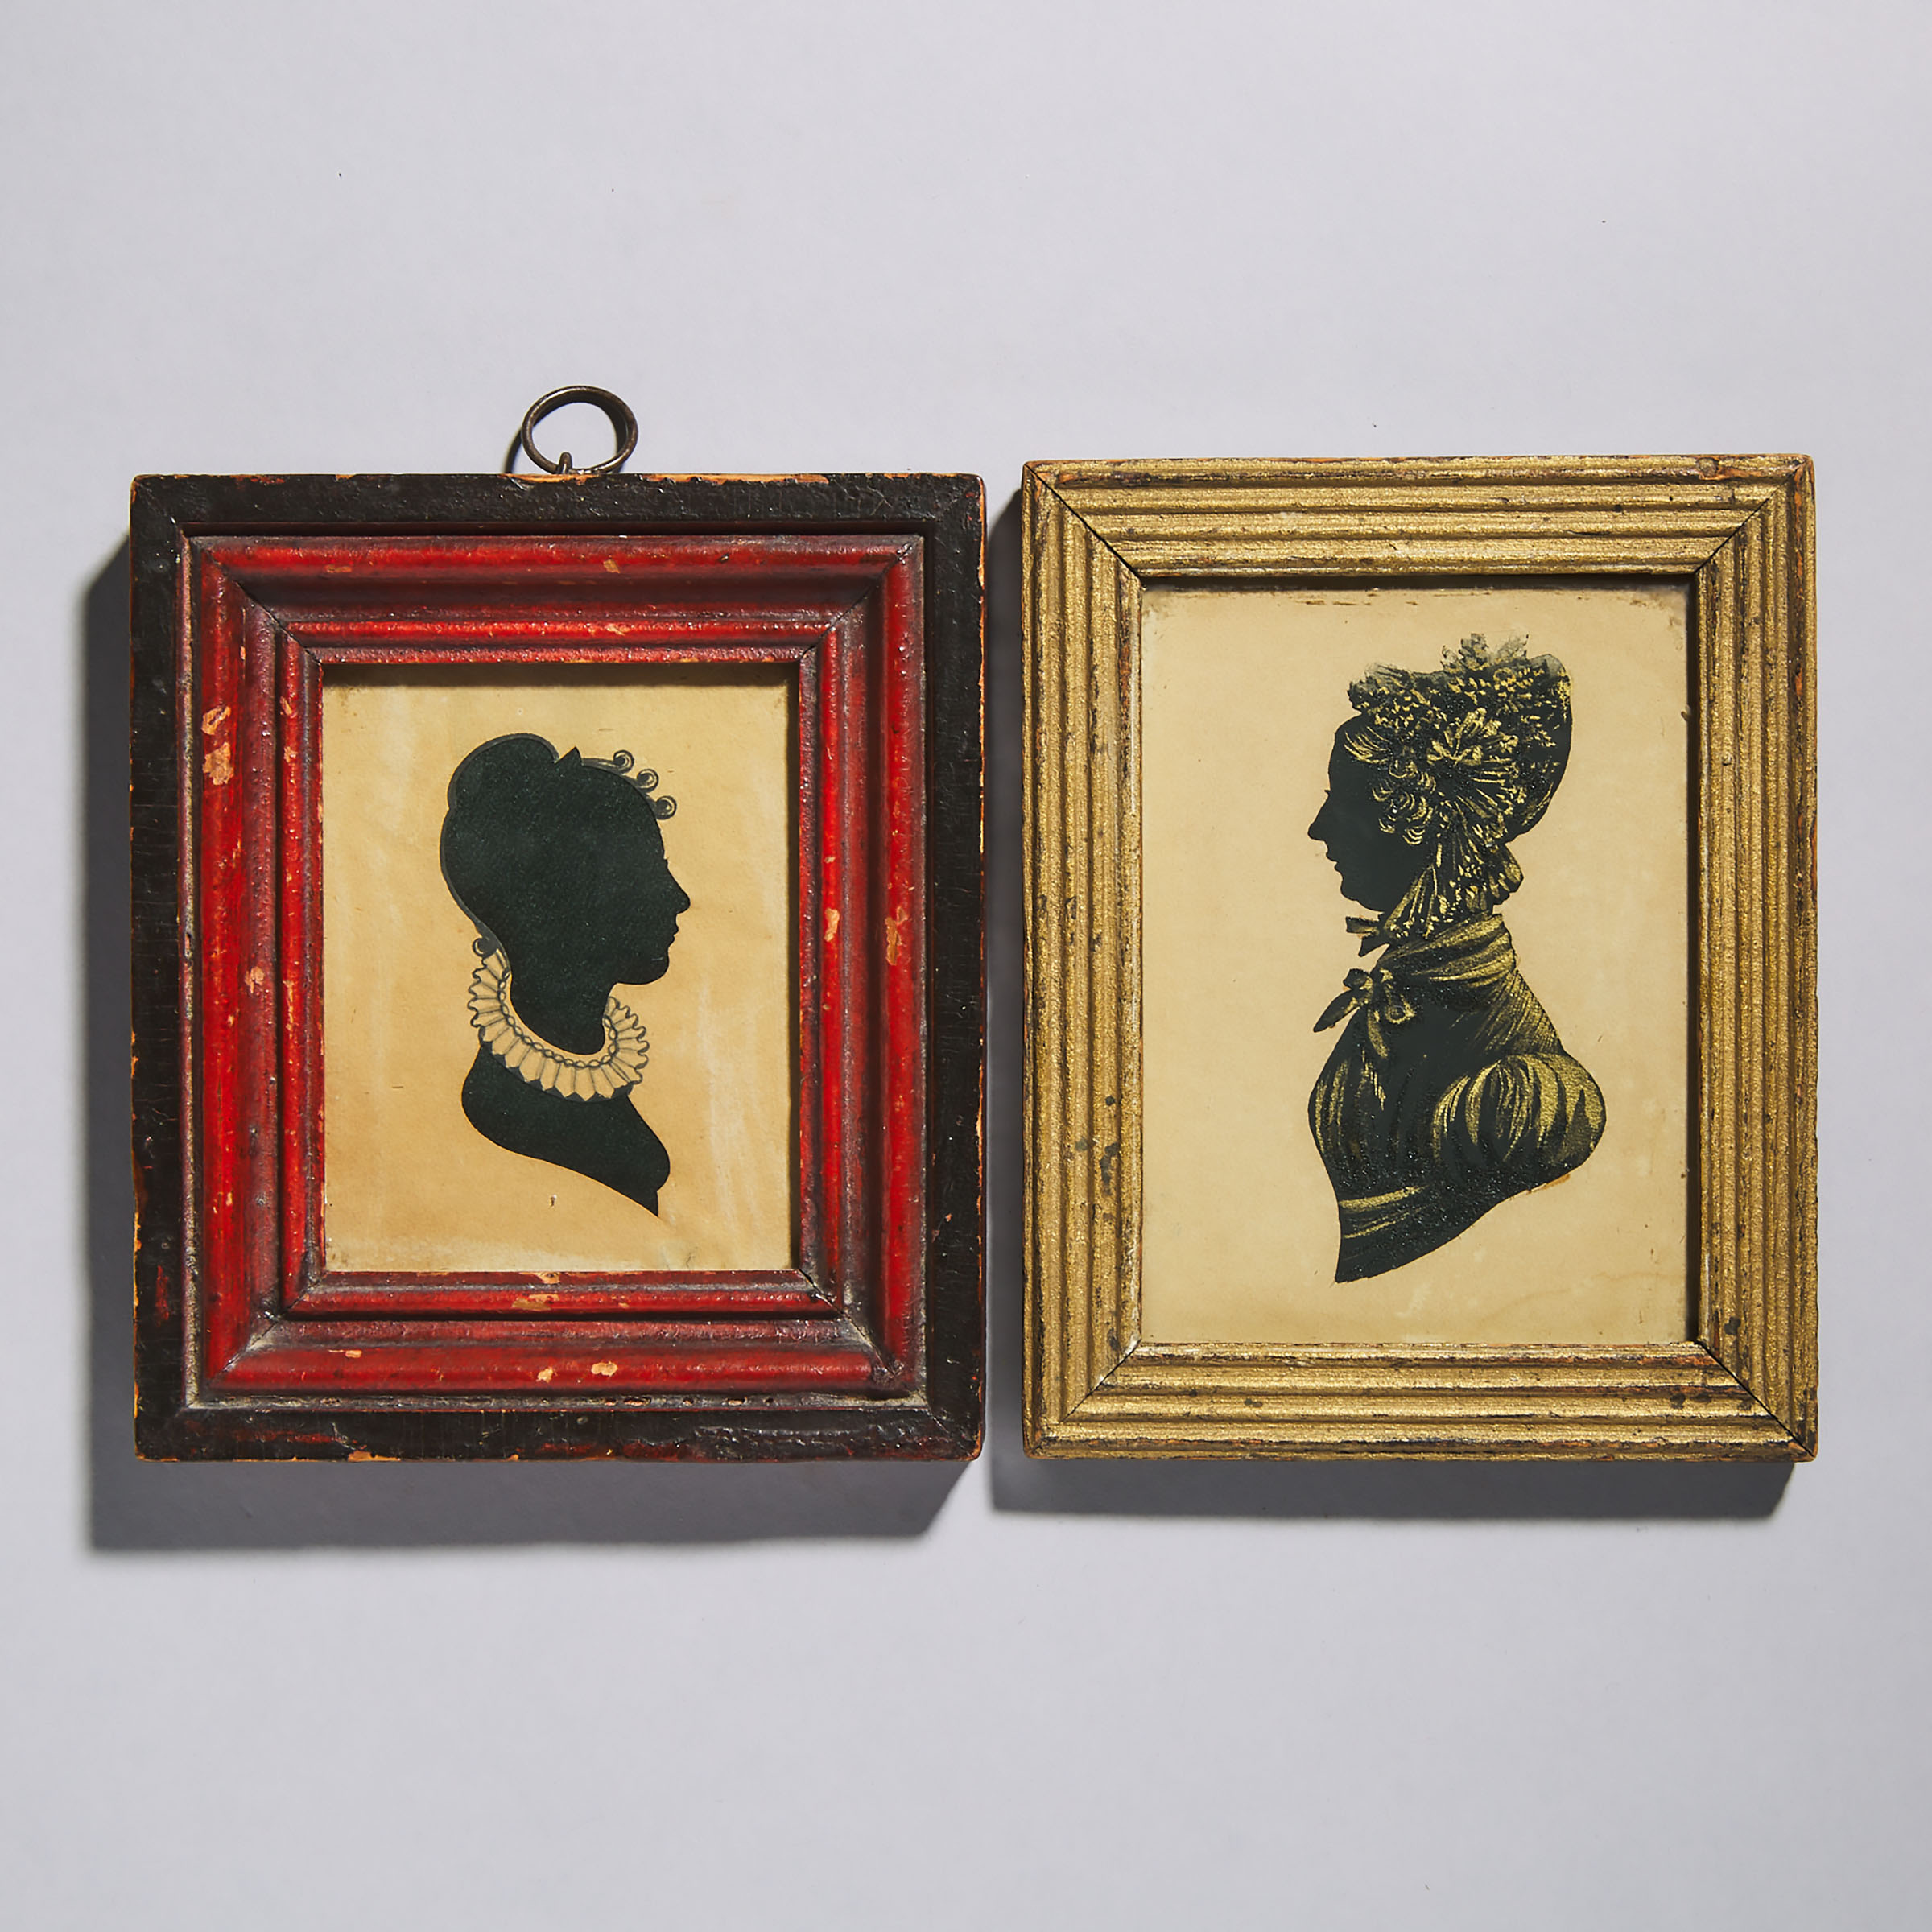 Two Portrait Silhouettes of Ladies, early 19th century